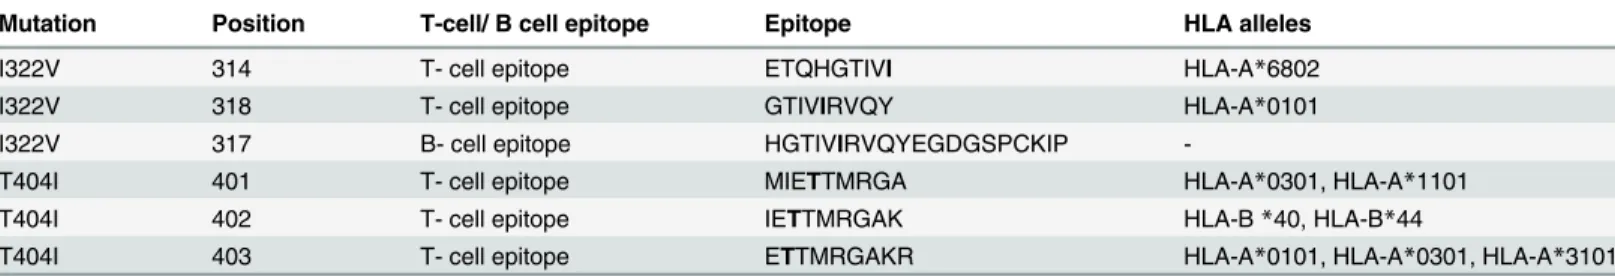 Table 1. Correlation of mutations in the envelope protein of the study strains with the predicted T and B cell epitopes.